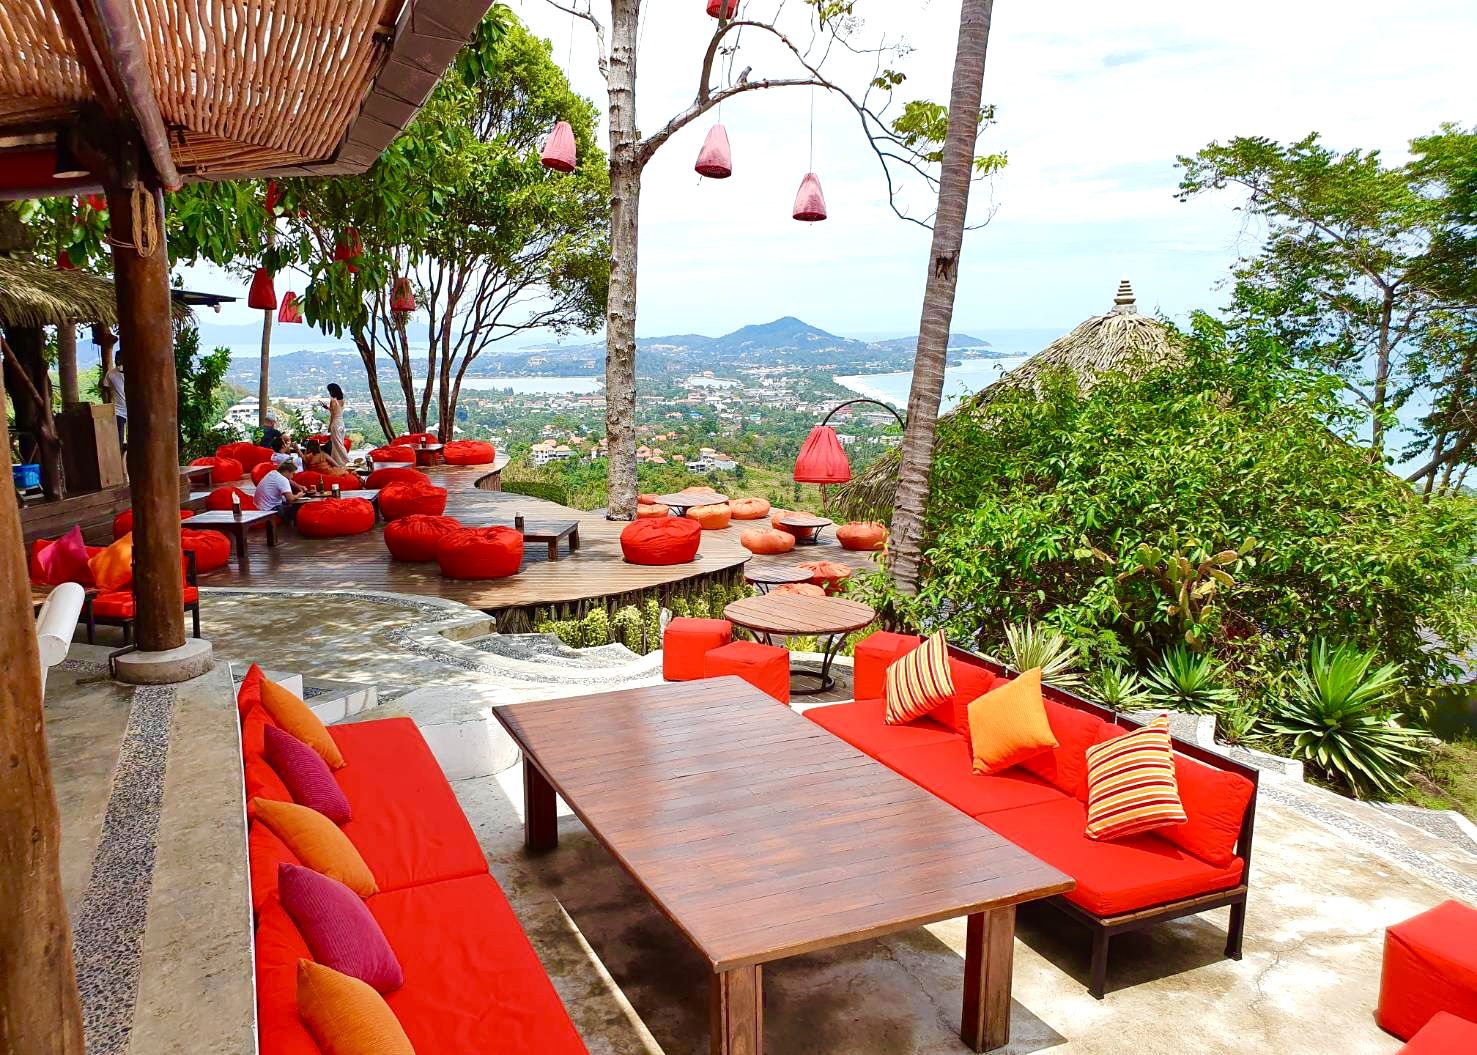 The Jungle Club is perched high in the hills near Chaweng Beach.